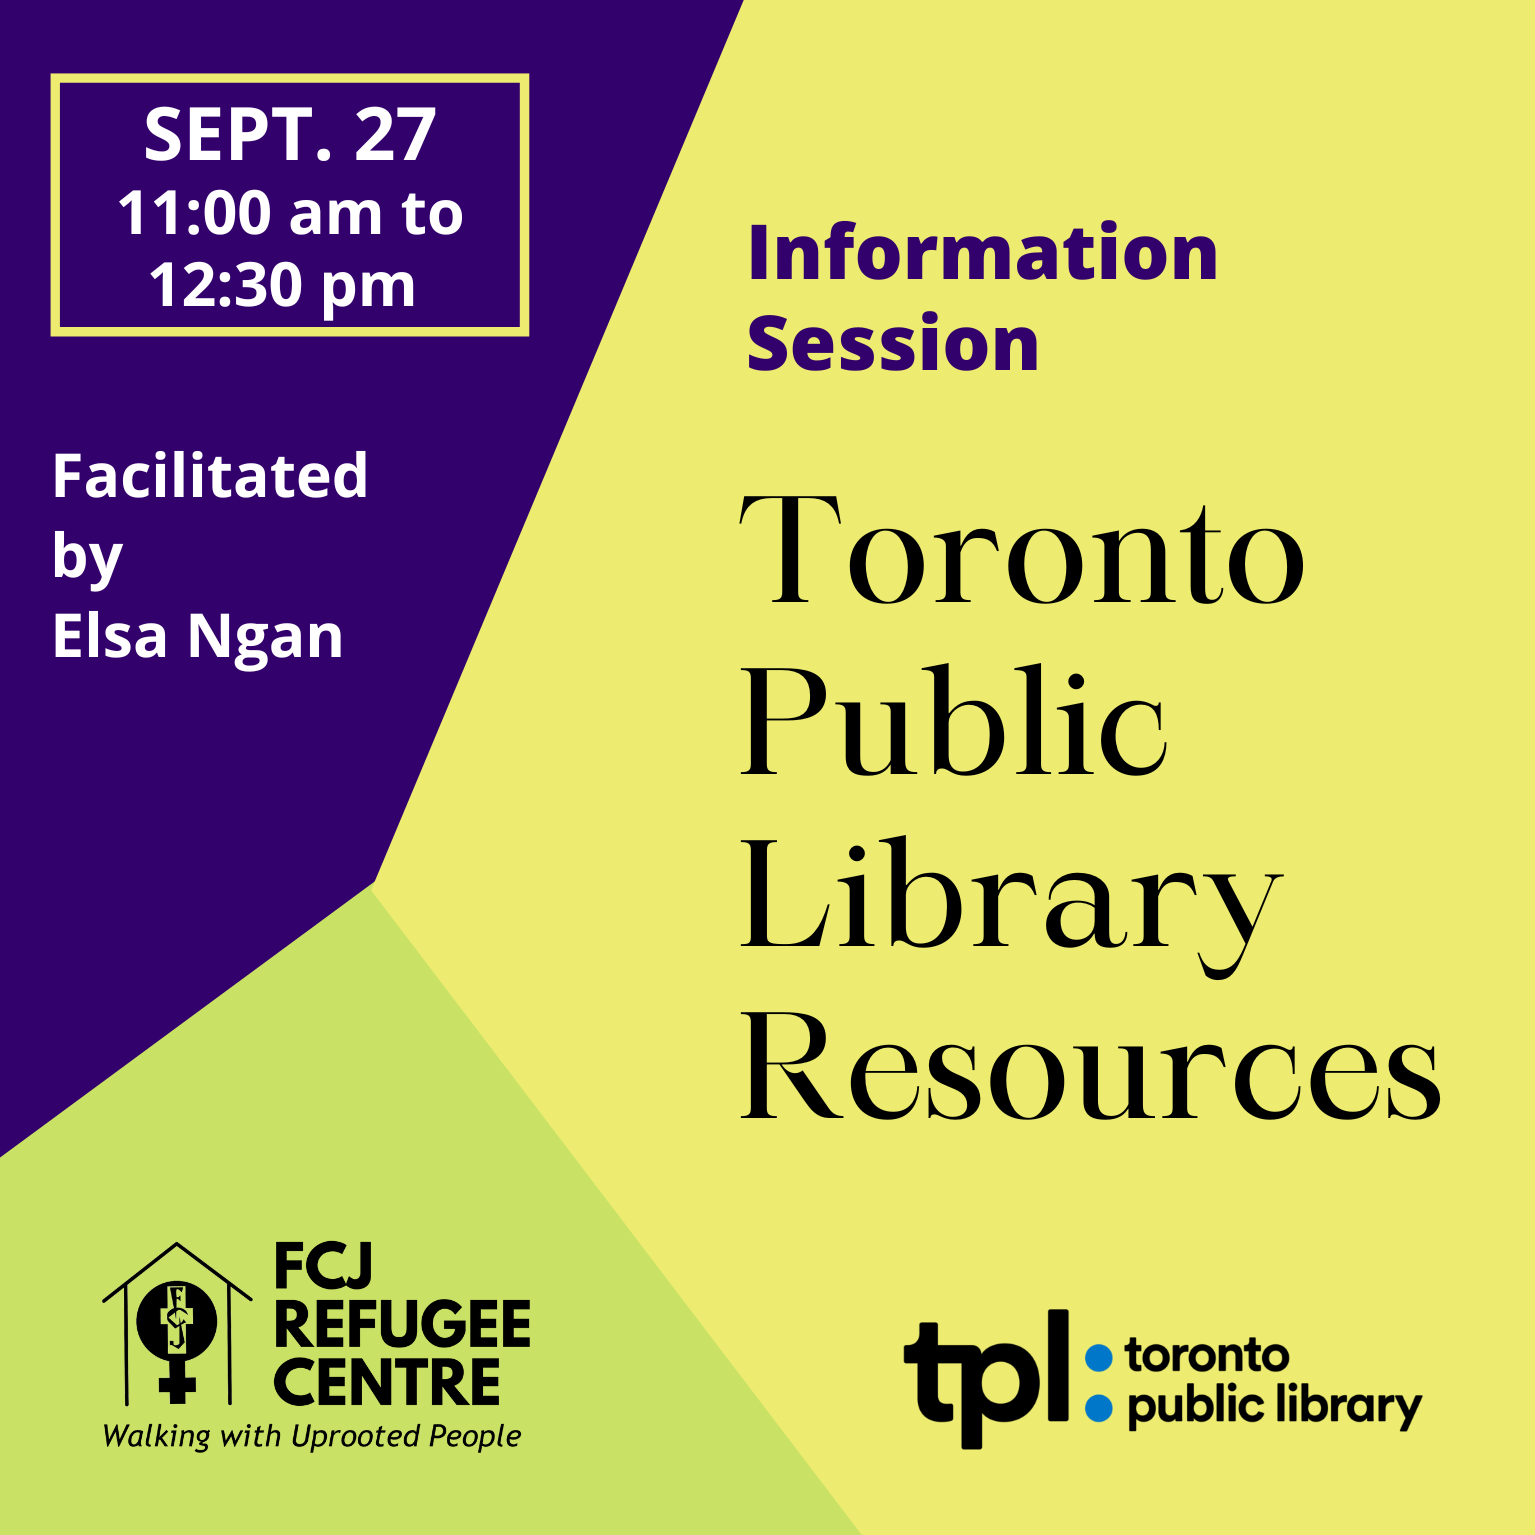 Toronto Public Library Resources Information Session